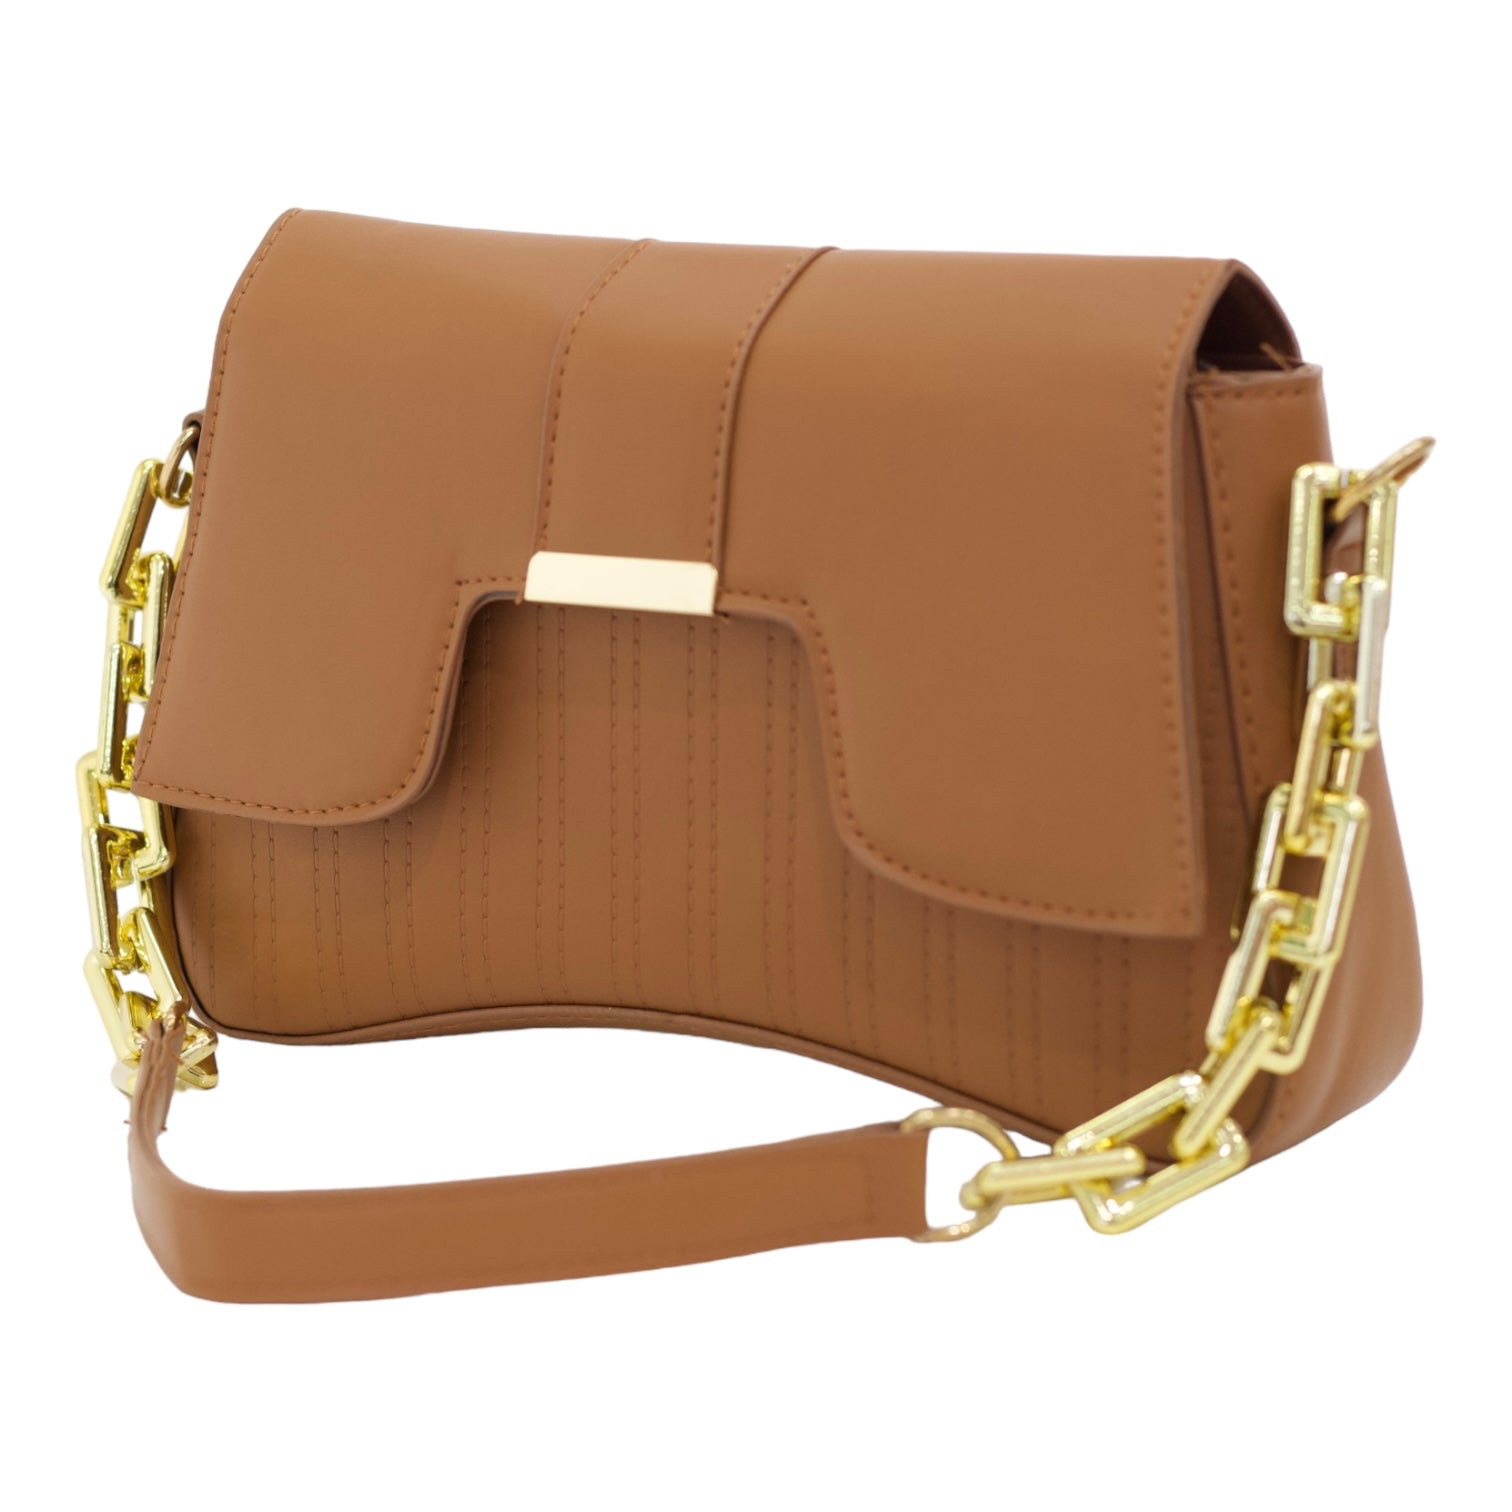 Kahula faux leather convertible crossbody